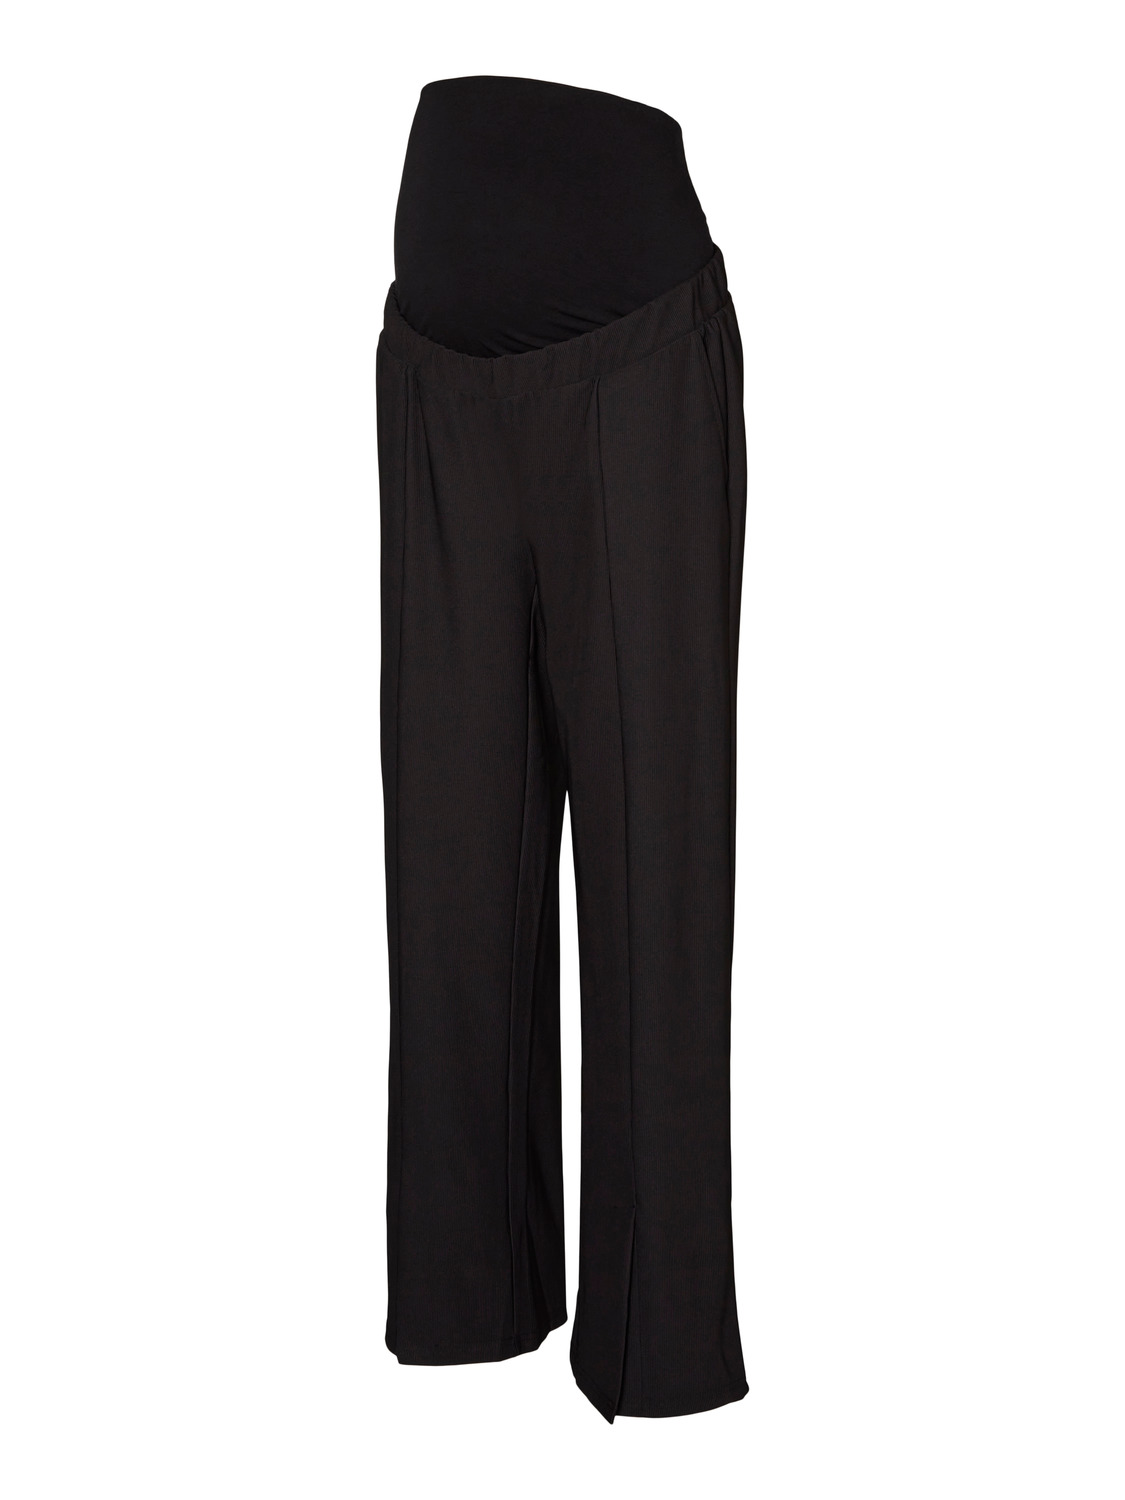 MAMA.LICIOUS Wide Leg Fit Trousers -Black - 20017802